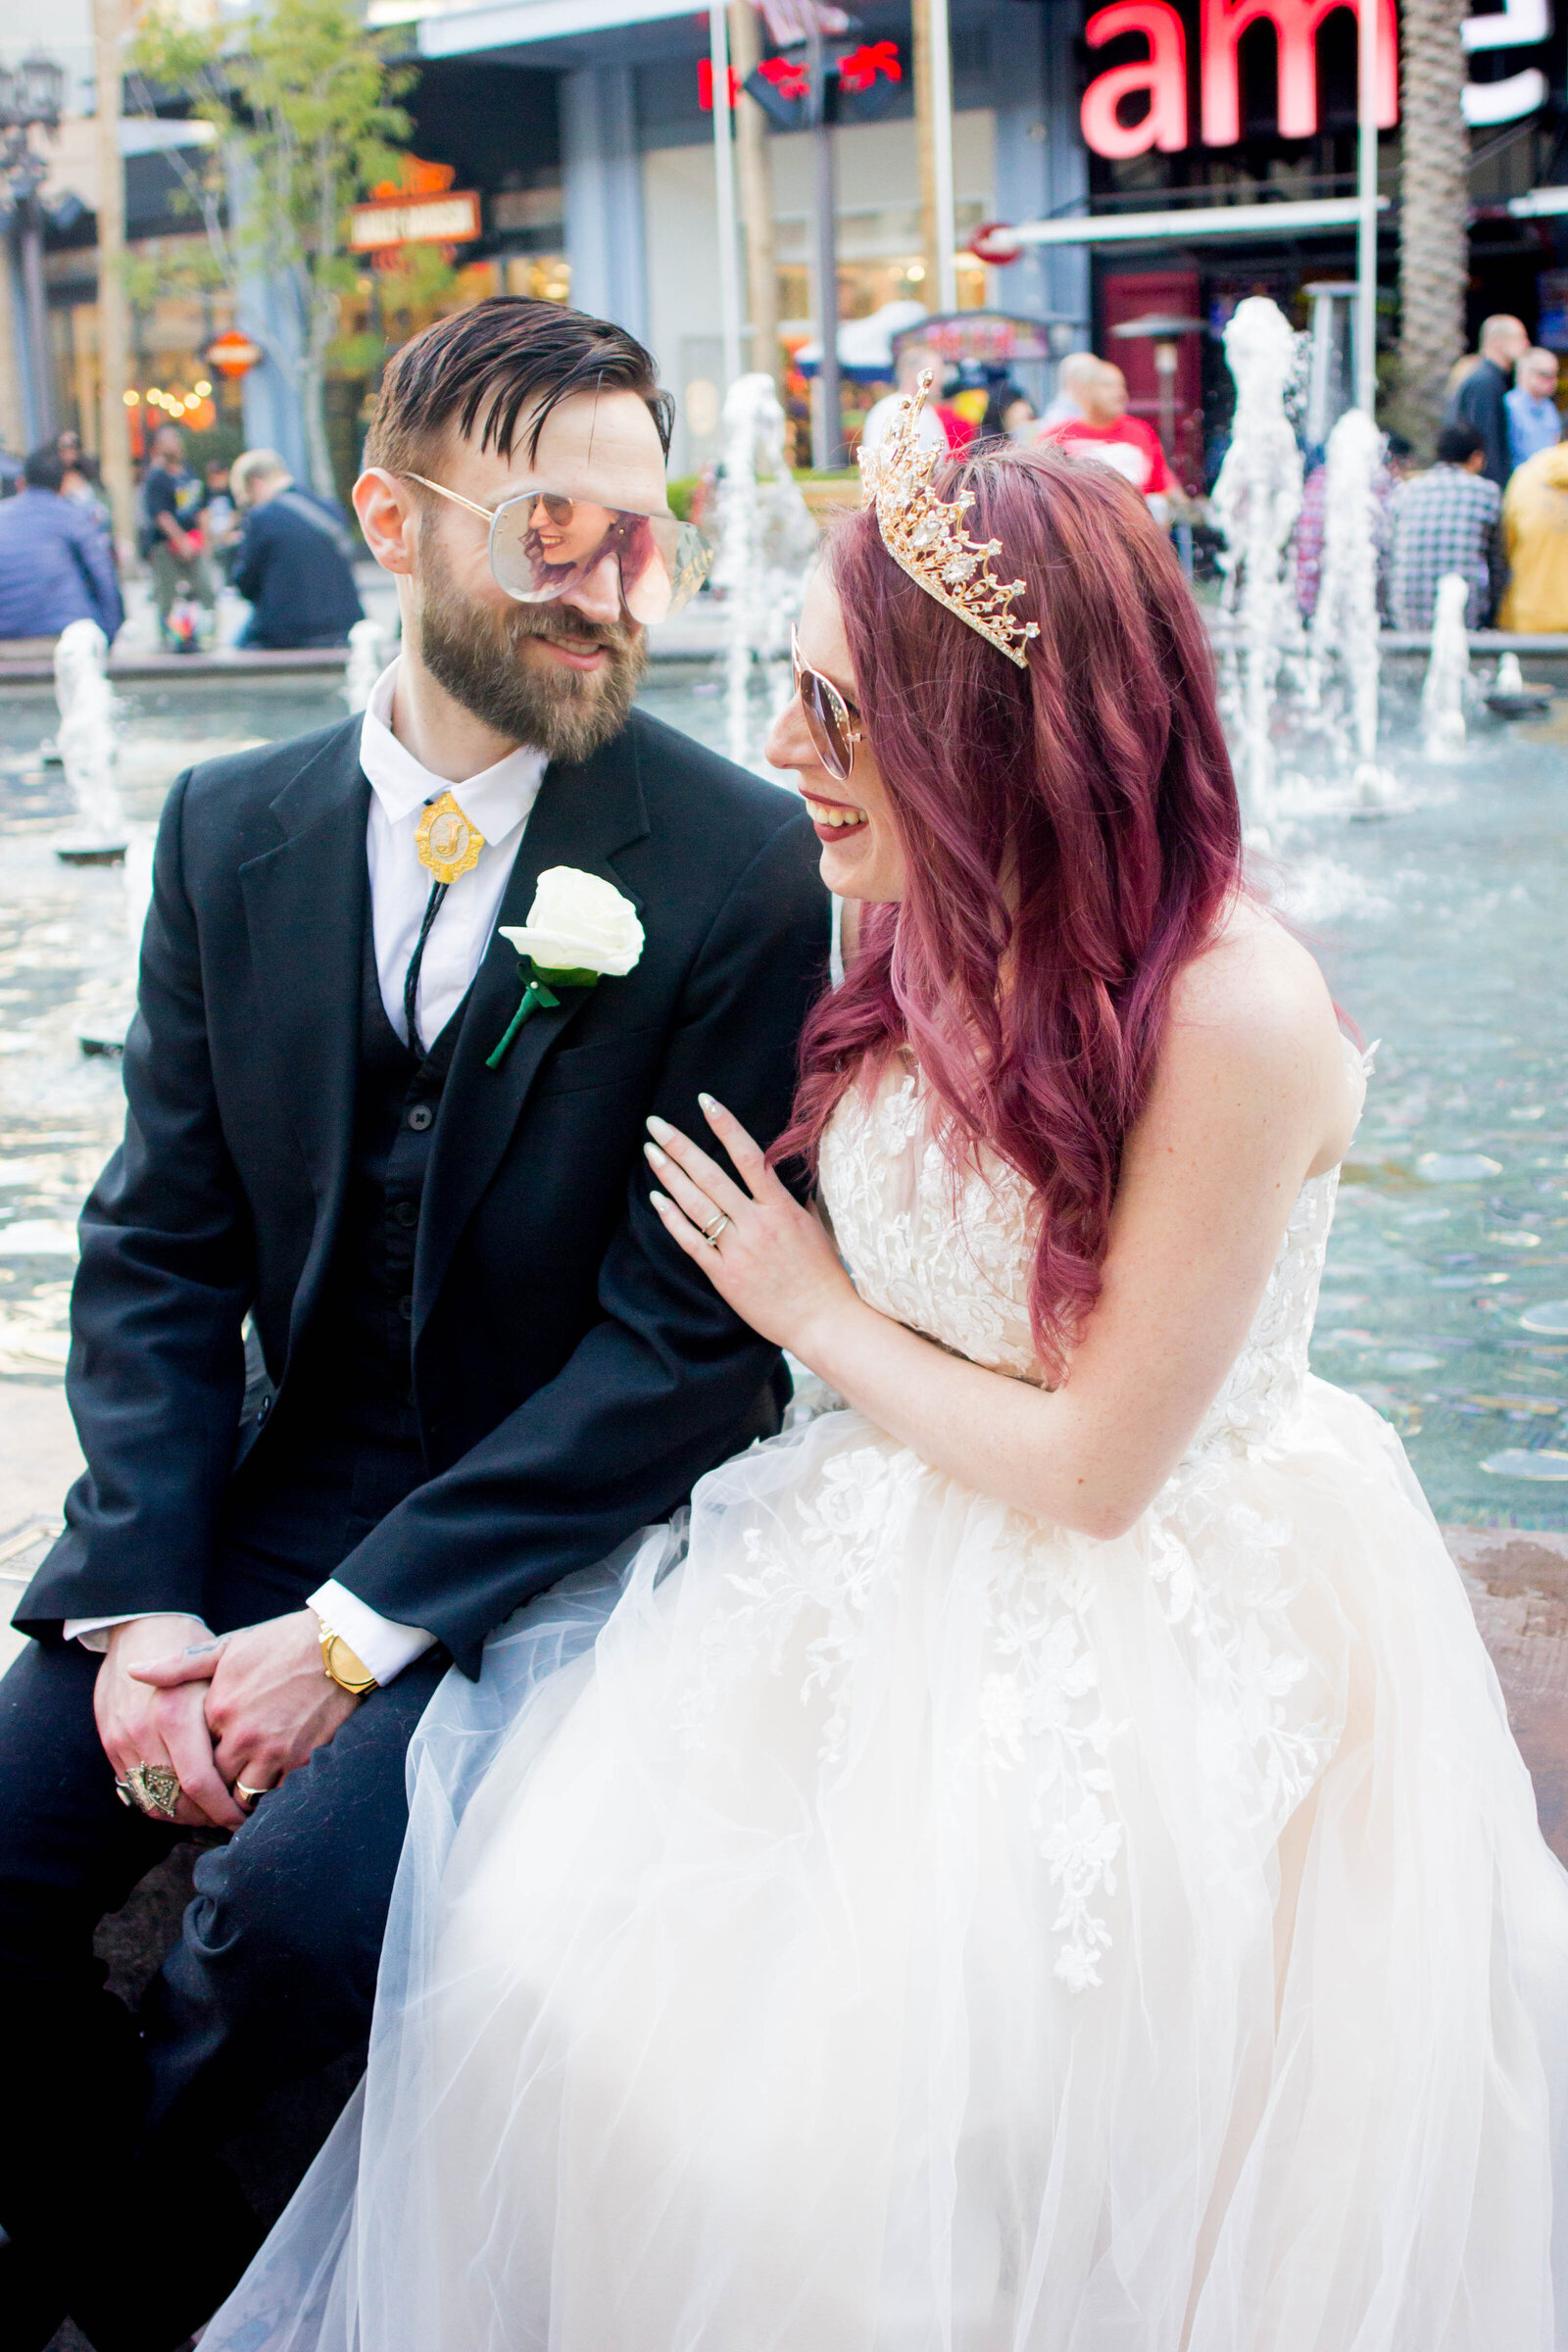 A man and woman on their wedding day sitting on a fountain in Las Vegas.